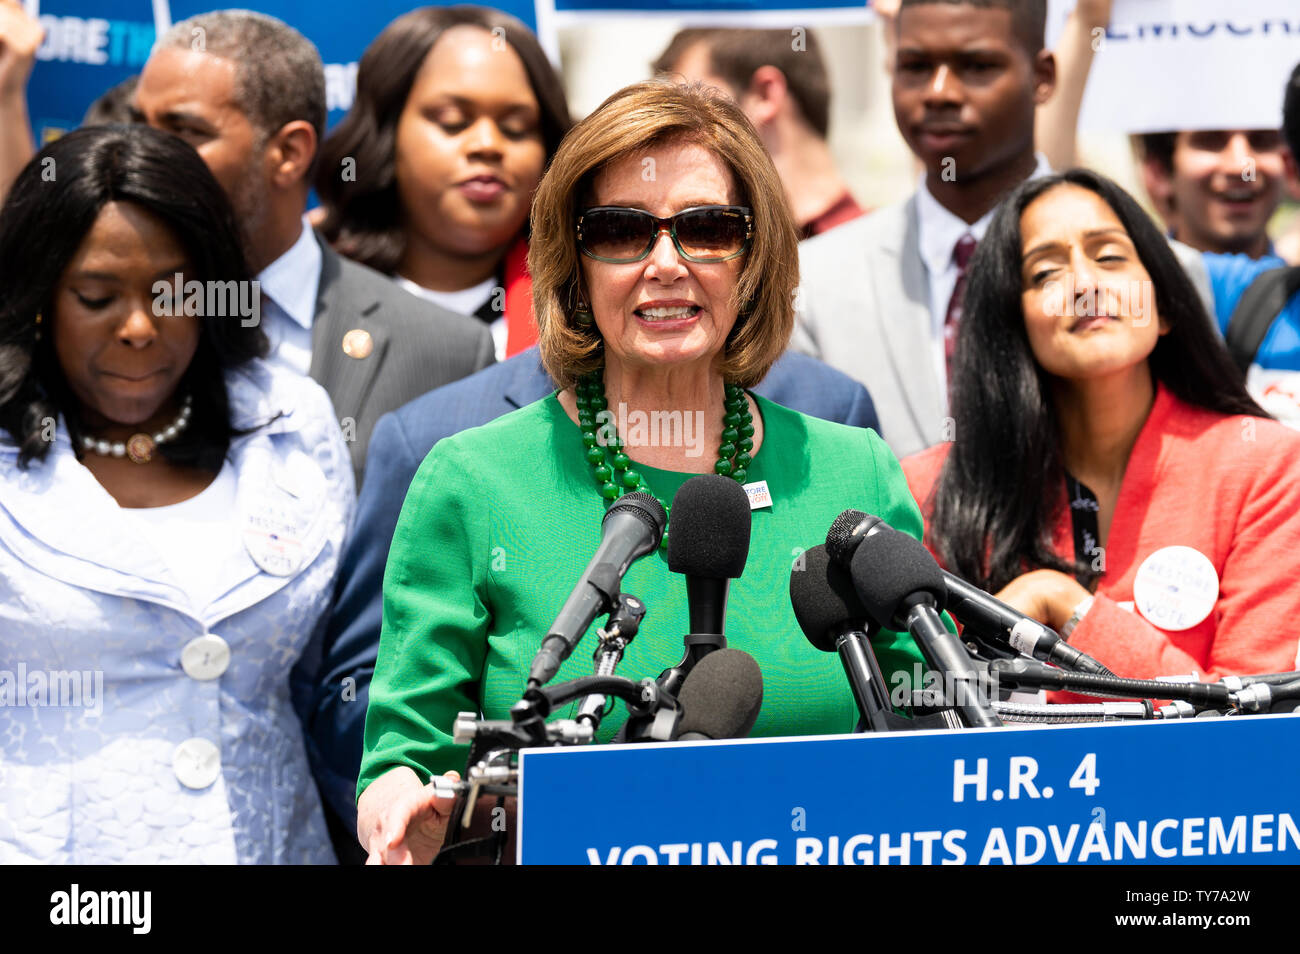 Speaker of the United States House of Representatives Nancy Pelosi (D-CA) speaking at a rally at the U.S. Capitol for H.R.4, the 'Voting Rights Advancement Act of 2019'. Stock Photo